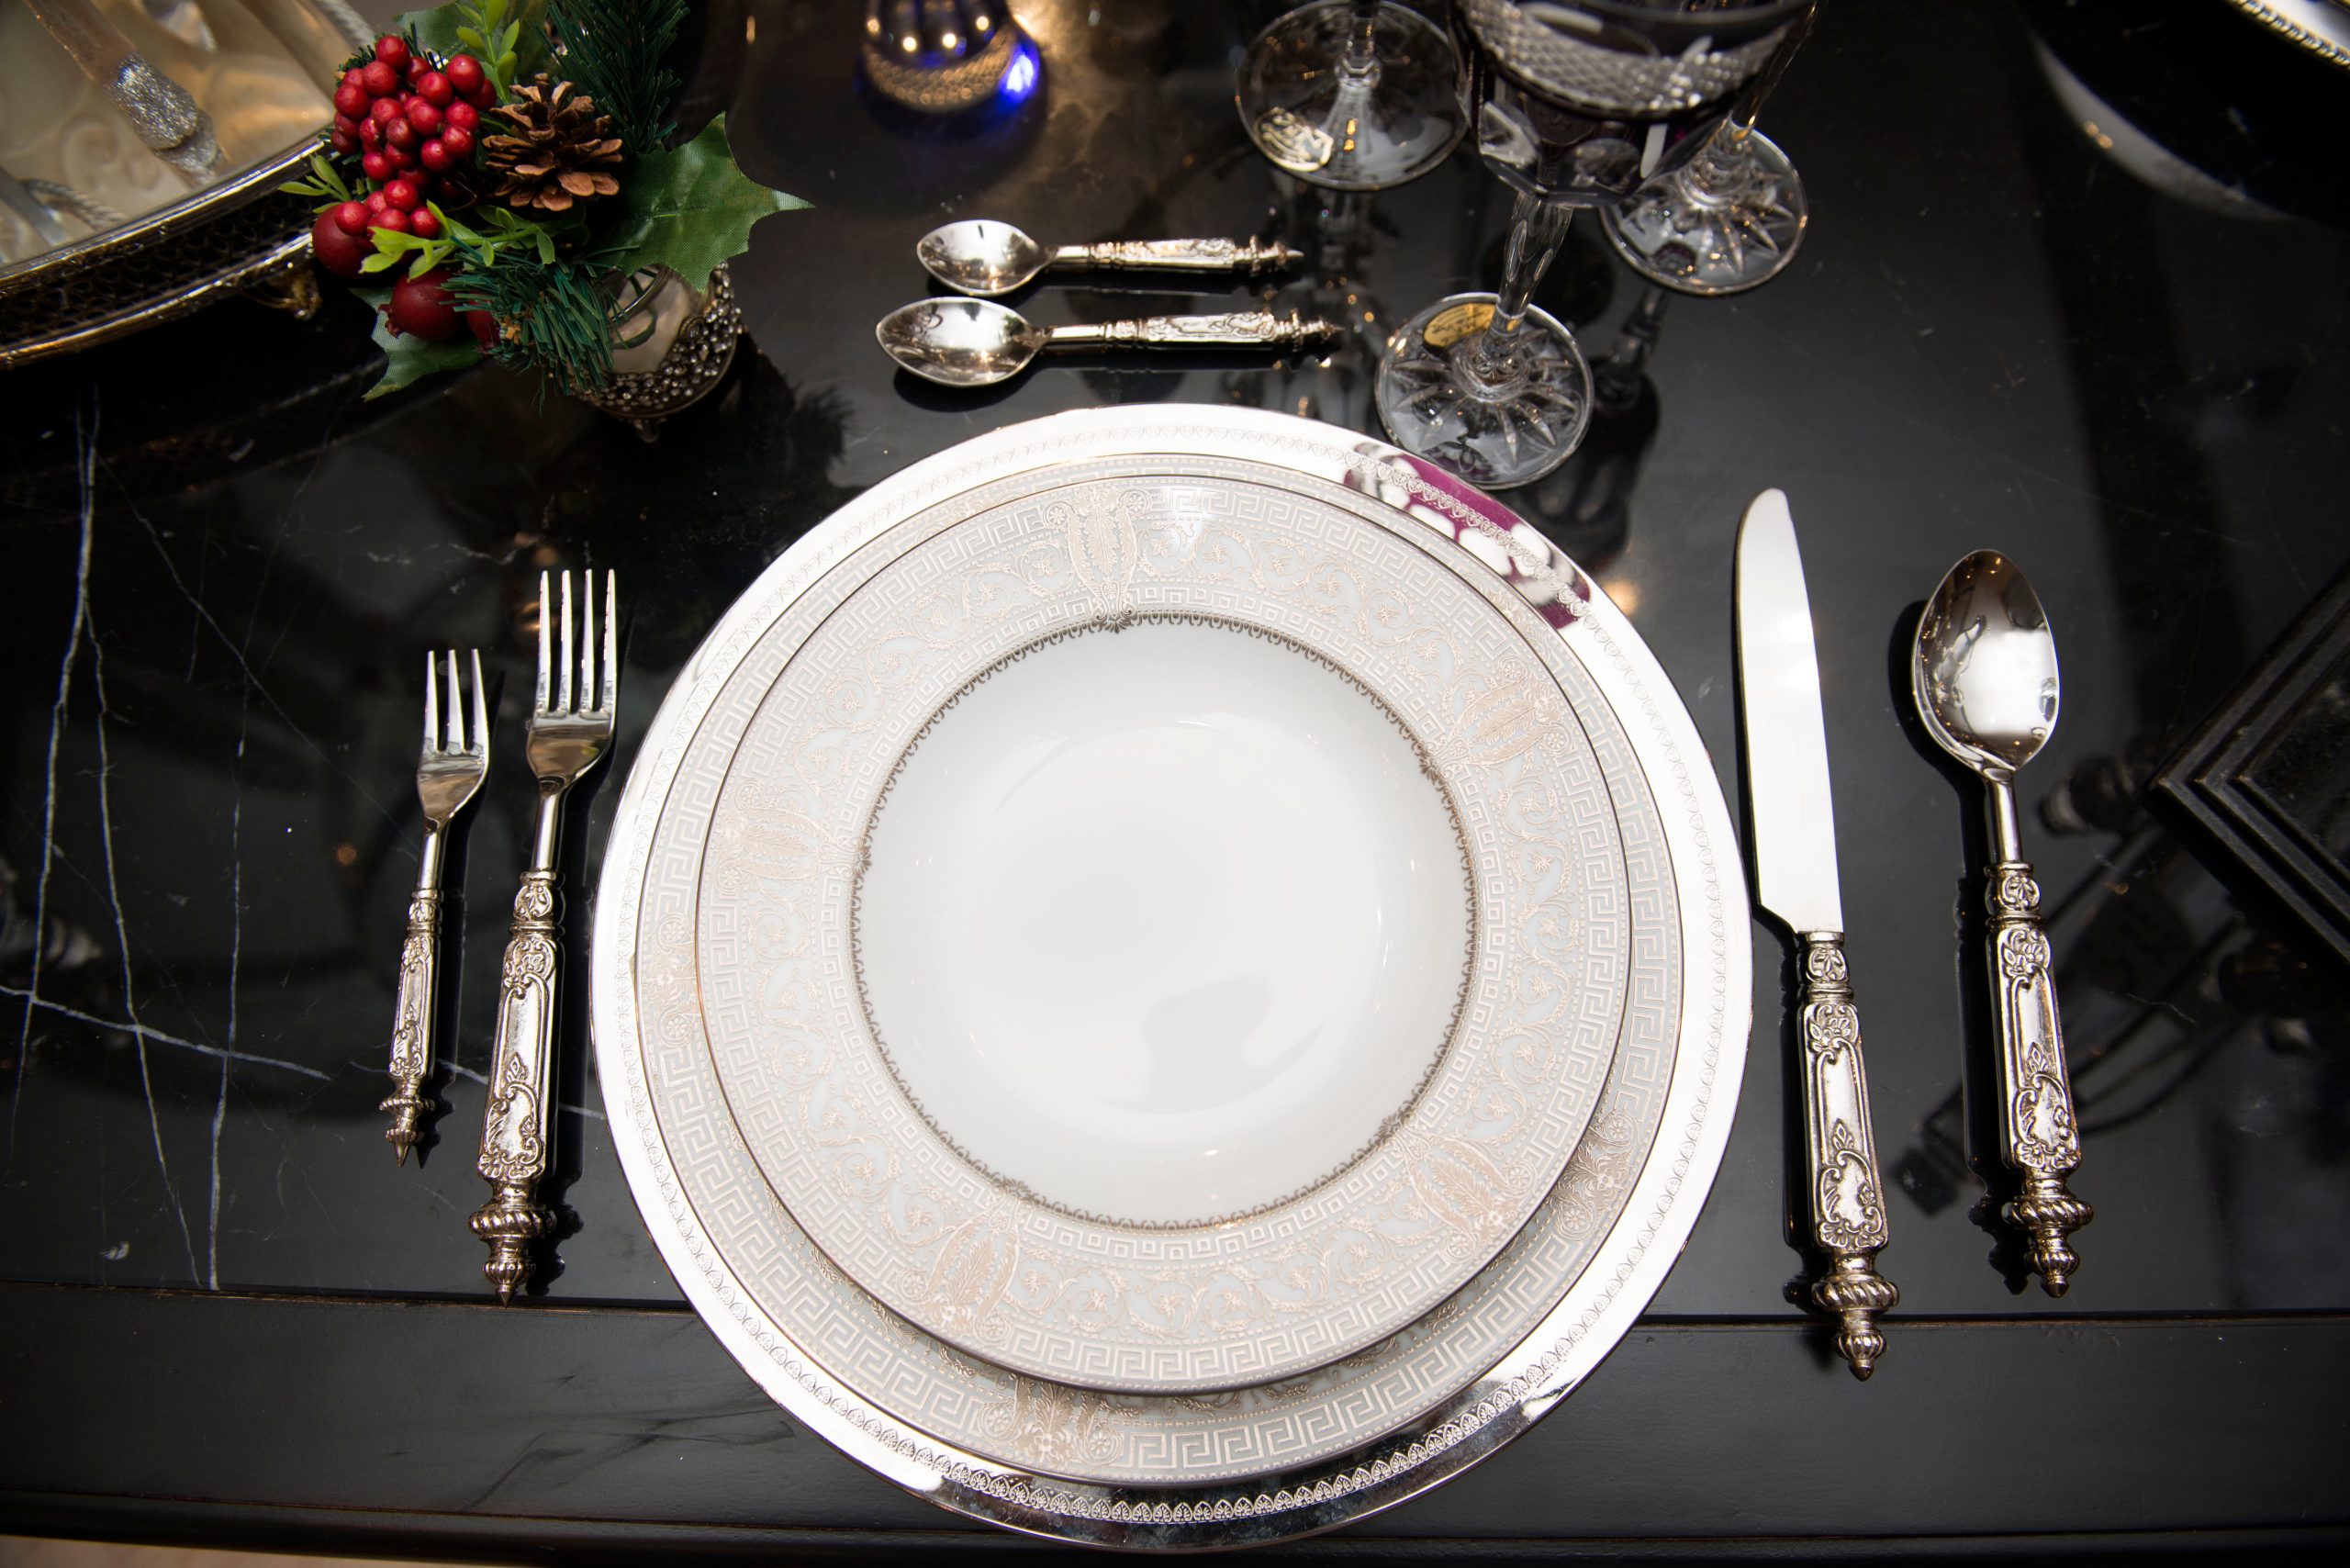 A place setting on a black table.